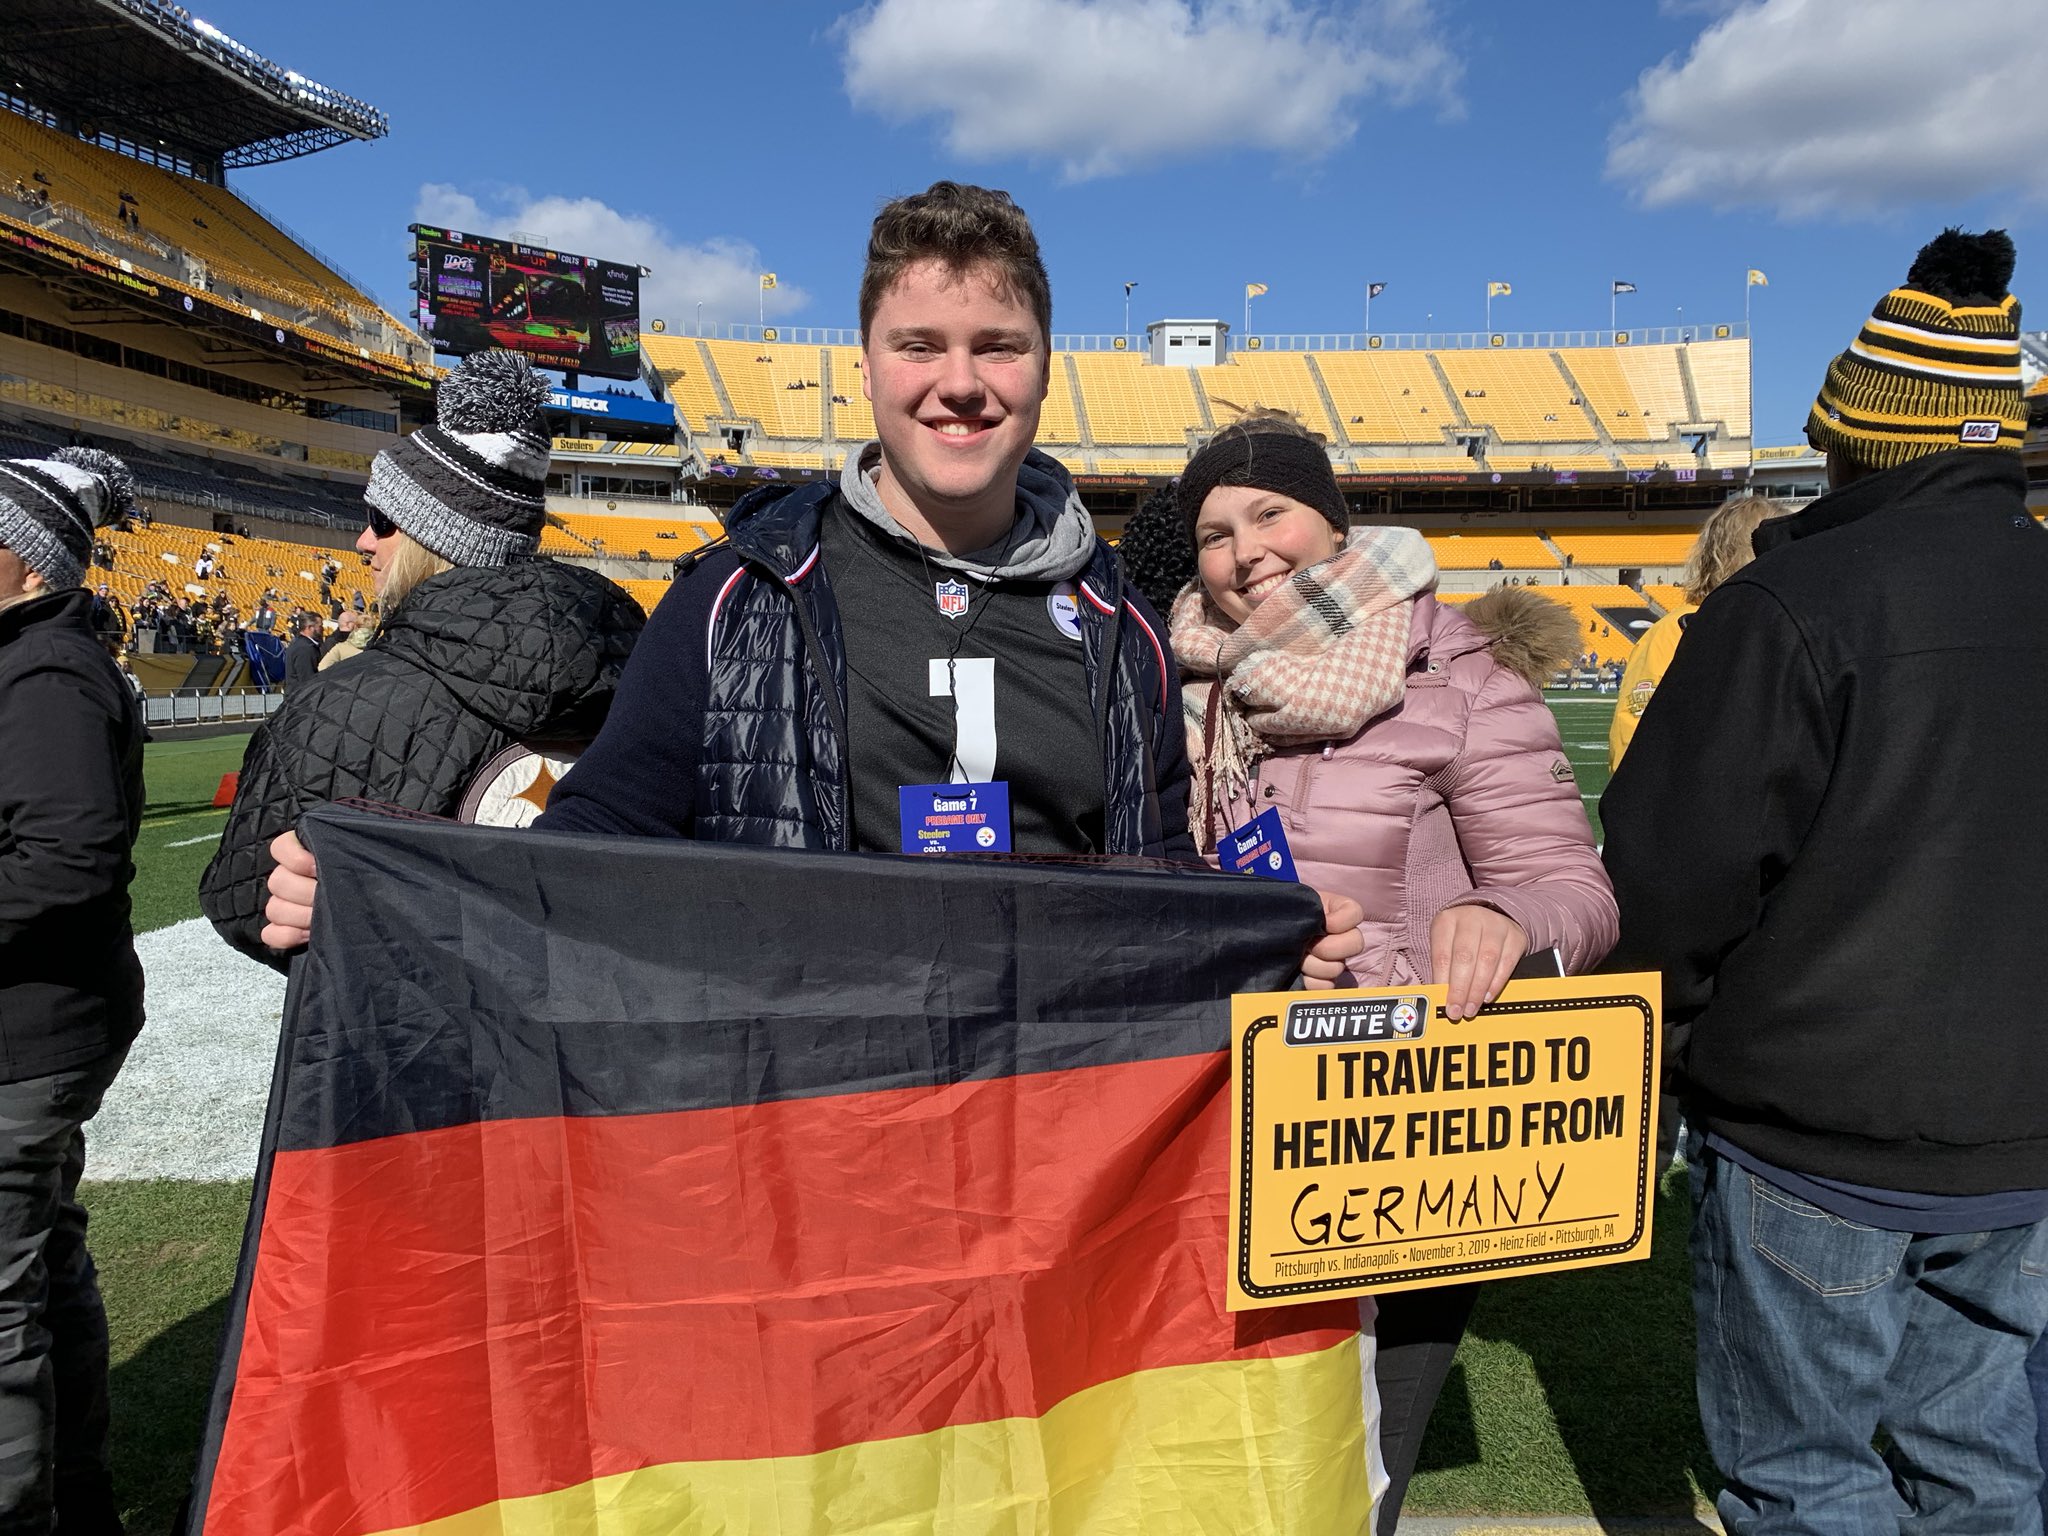 SteelersNationUnite on Twitter: "These fans traveled all the way from from  Germany to watch our game against the Colts! 🇩🇪 #HereWeGo  <a href=